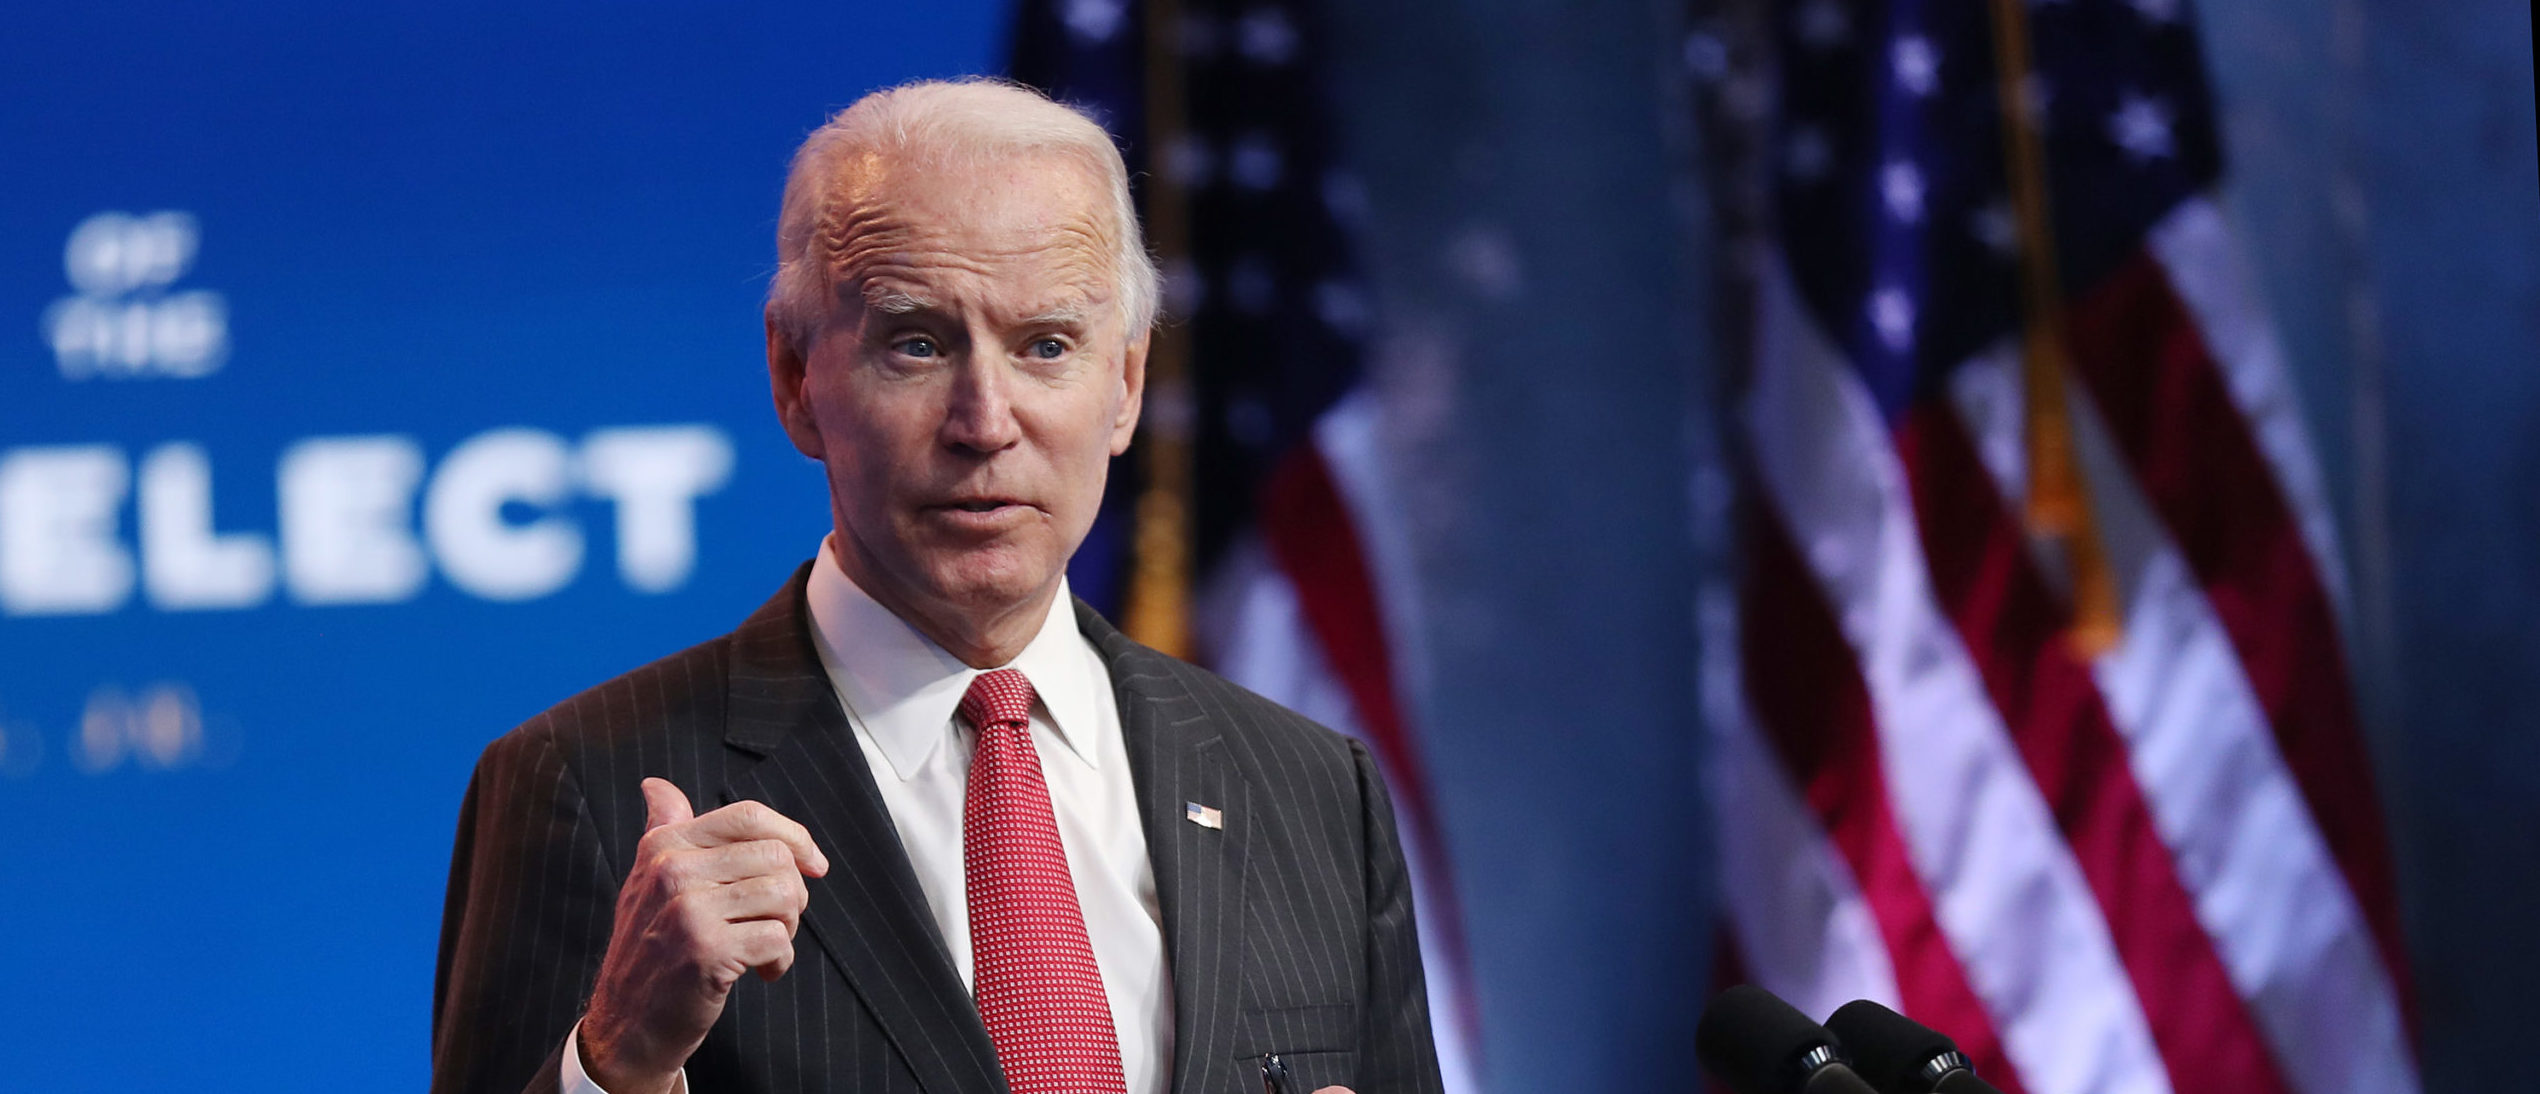 U.S. President-elect Joe Biden speaks as he addresses the media after a virtual meeting with the National Governors Association's executive committee at the Queen Theater on November 19, 2020 in Wilmington, Delaware. (Joe Raedle/Getty Images)